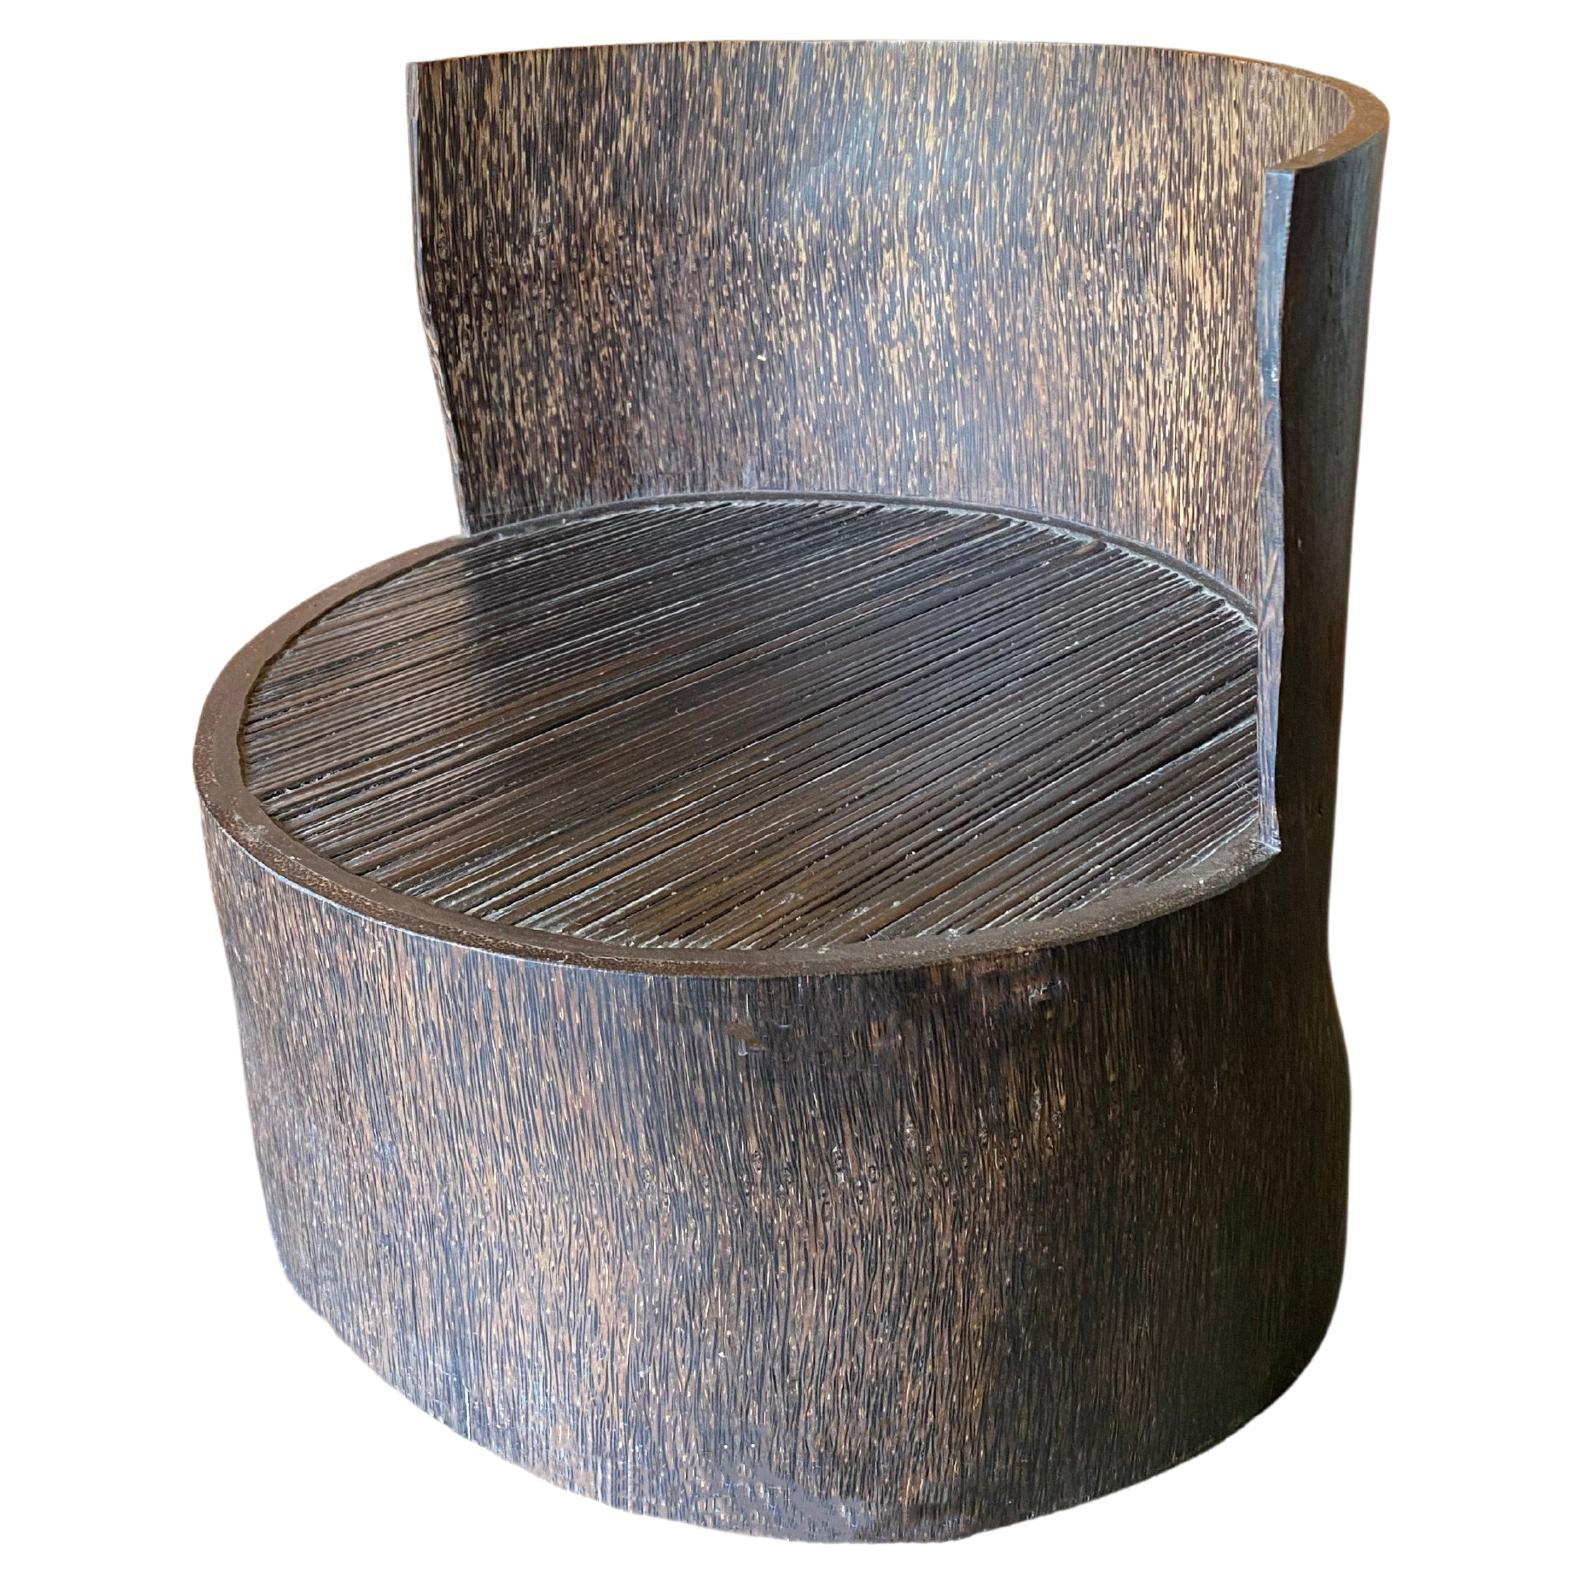 Sculptural Low Chair with Backrest Carved from a Palm Tree Trunk For Sale